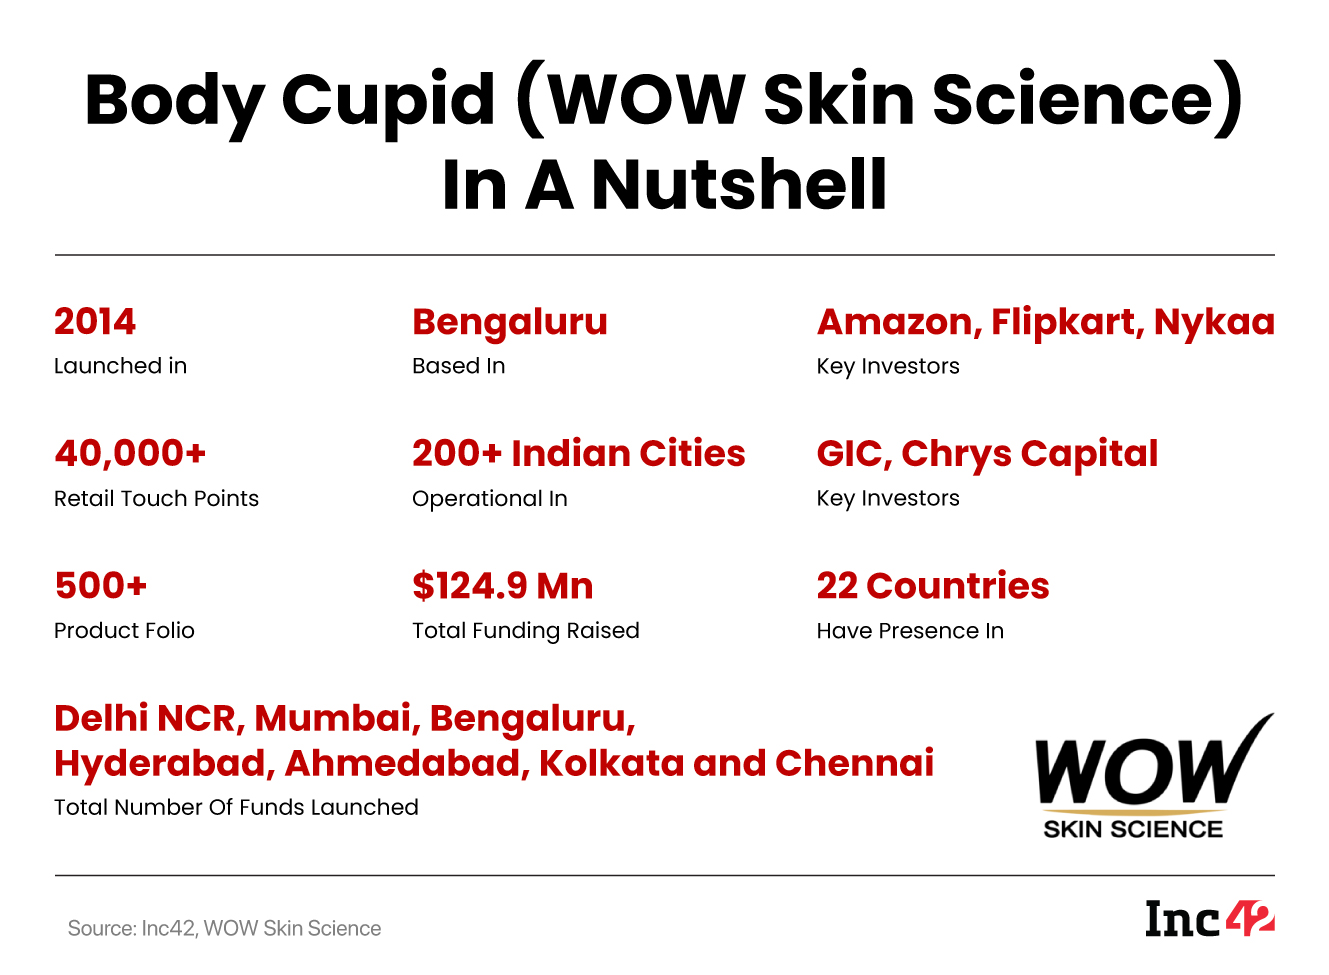 the company, which is now registered as Body Cupid Private Limited, fosters four brands — WOW Skin Science (its flagship brand), WOW Life Science, Body Cupid, and Nature Derma — and has a portfolio of over 500 products.